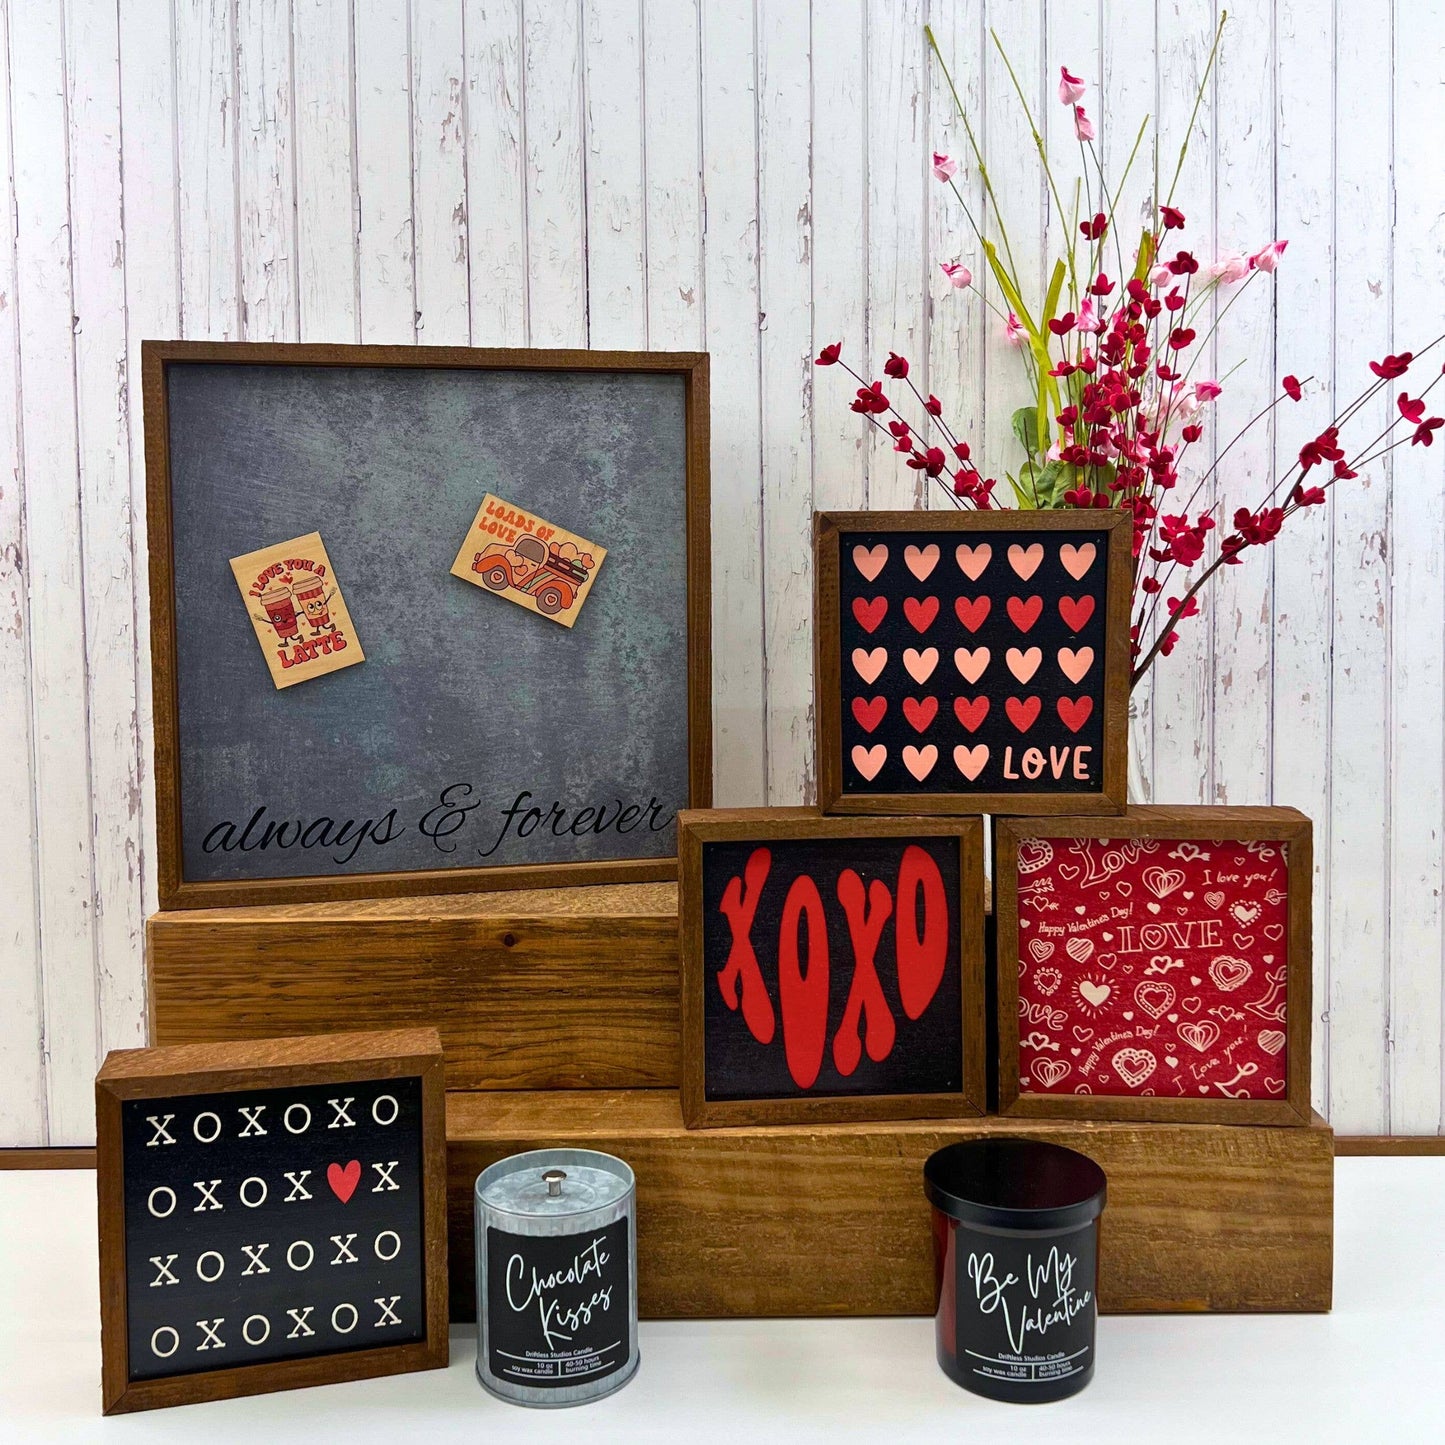 6 x 6 Love "Hearts" Valentines Day Wood Sign